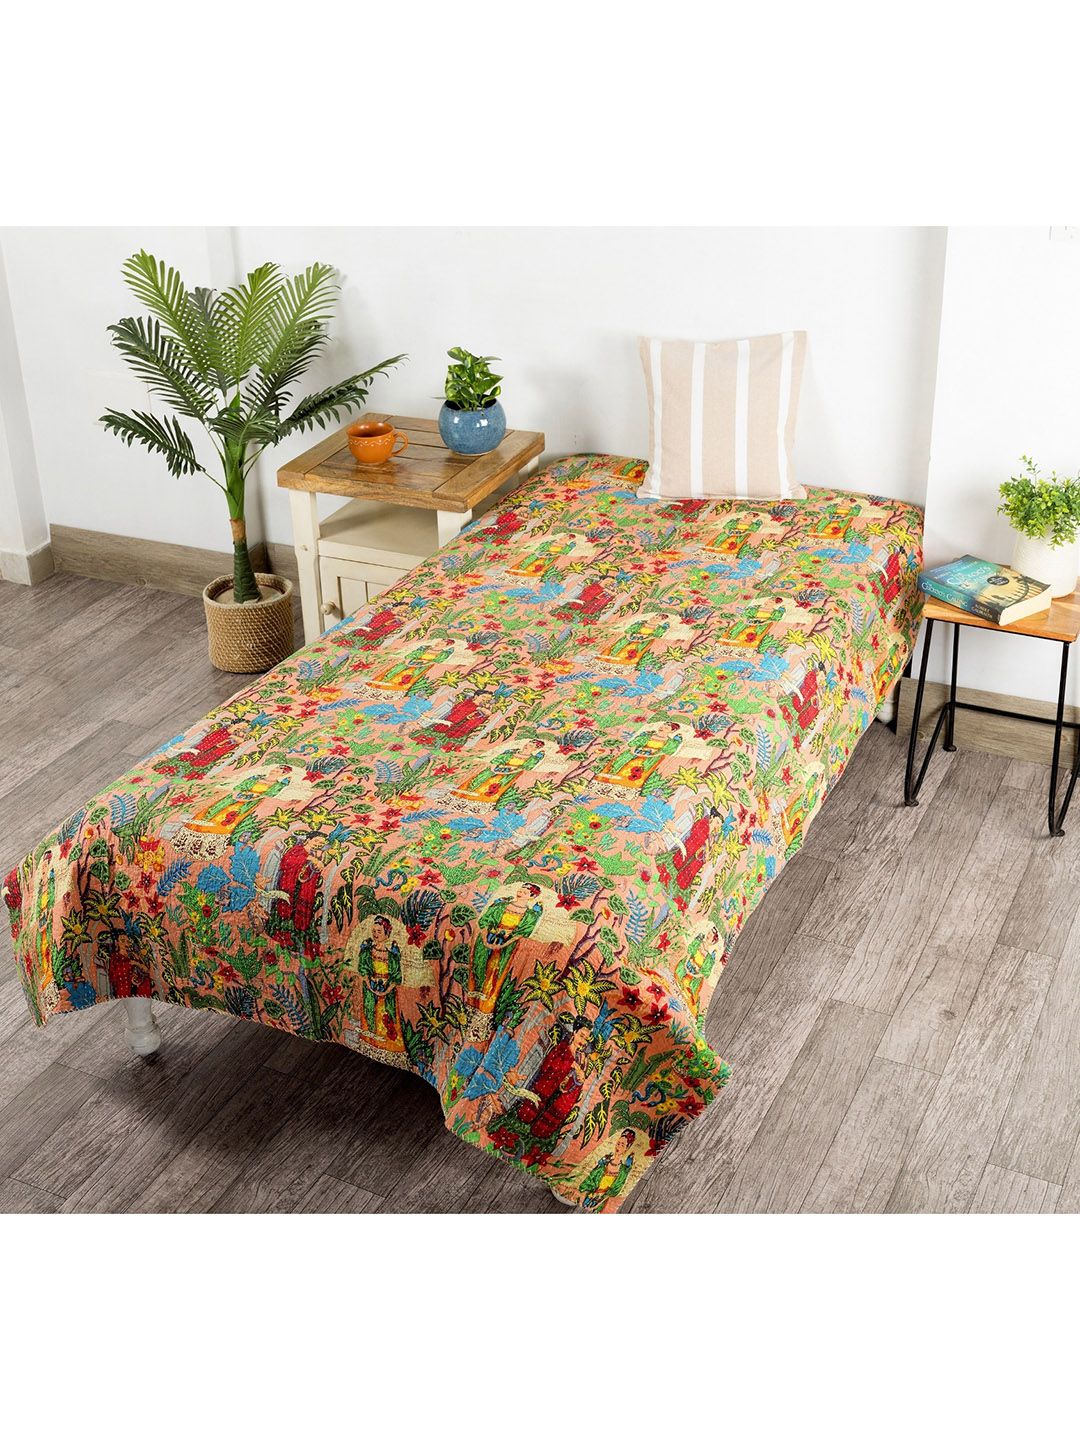 HANDICRAFT PALACE Peach & Green Frida Kahlo Printed Kantha Quilted Cotton Single Bed Cover Price in India